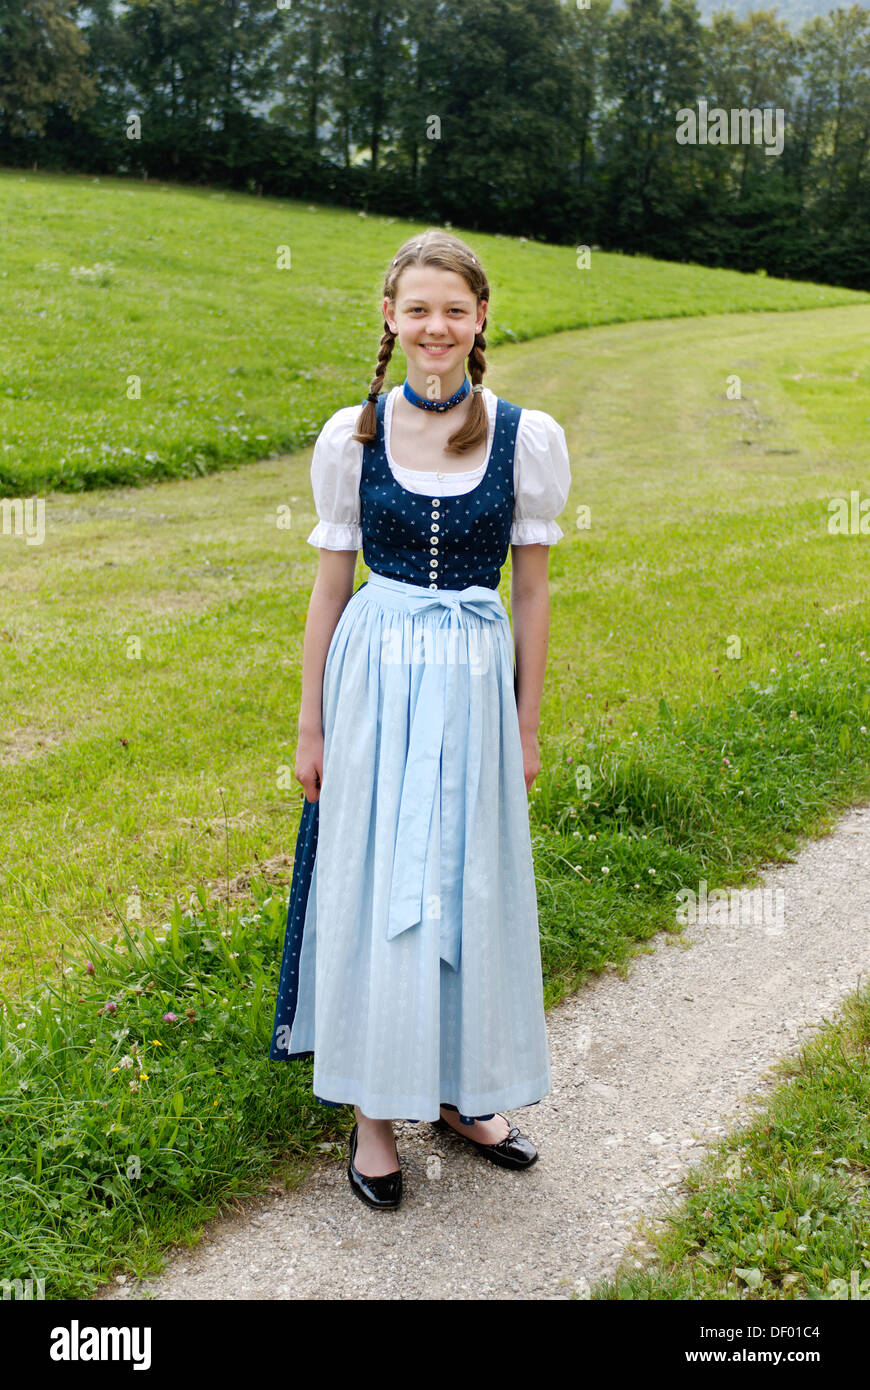 Young girl with Dirndl bavarian traditional costume Stock Photo - Alamy